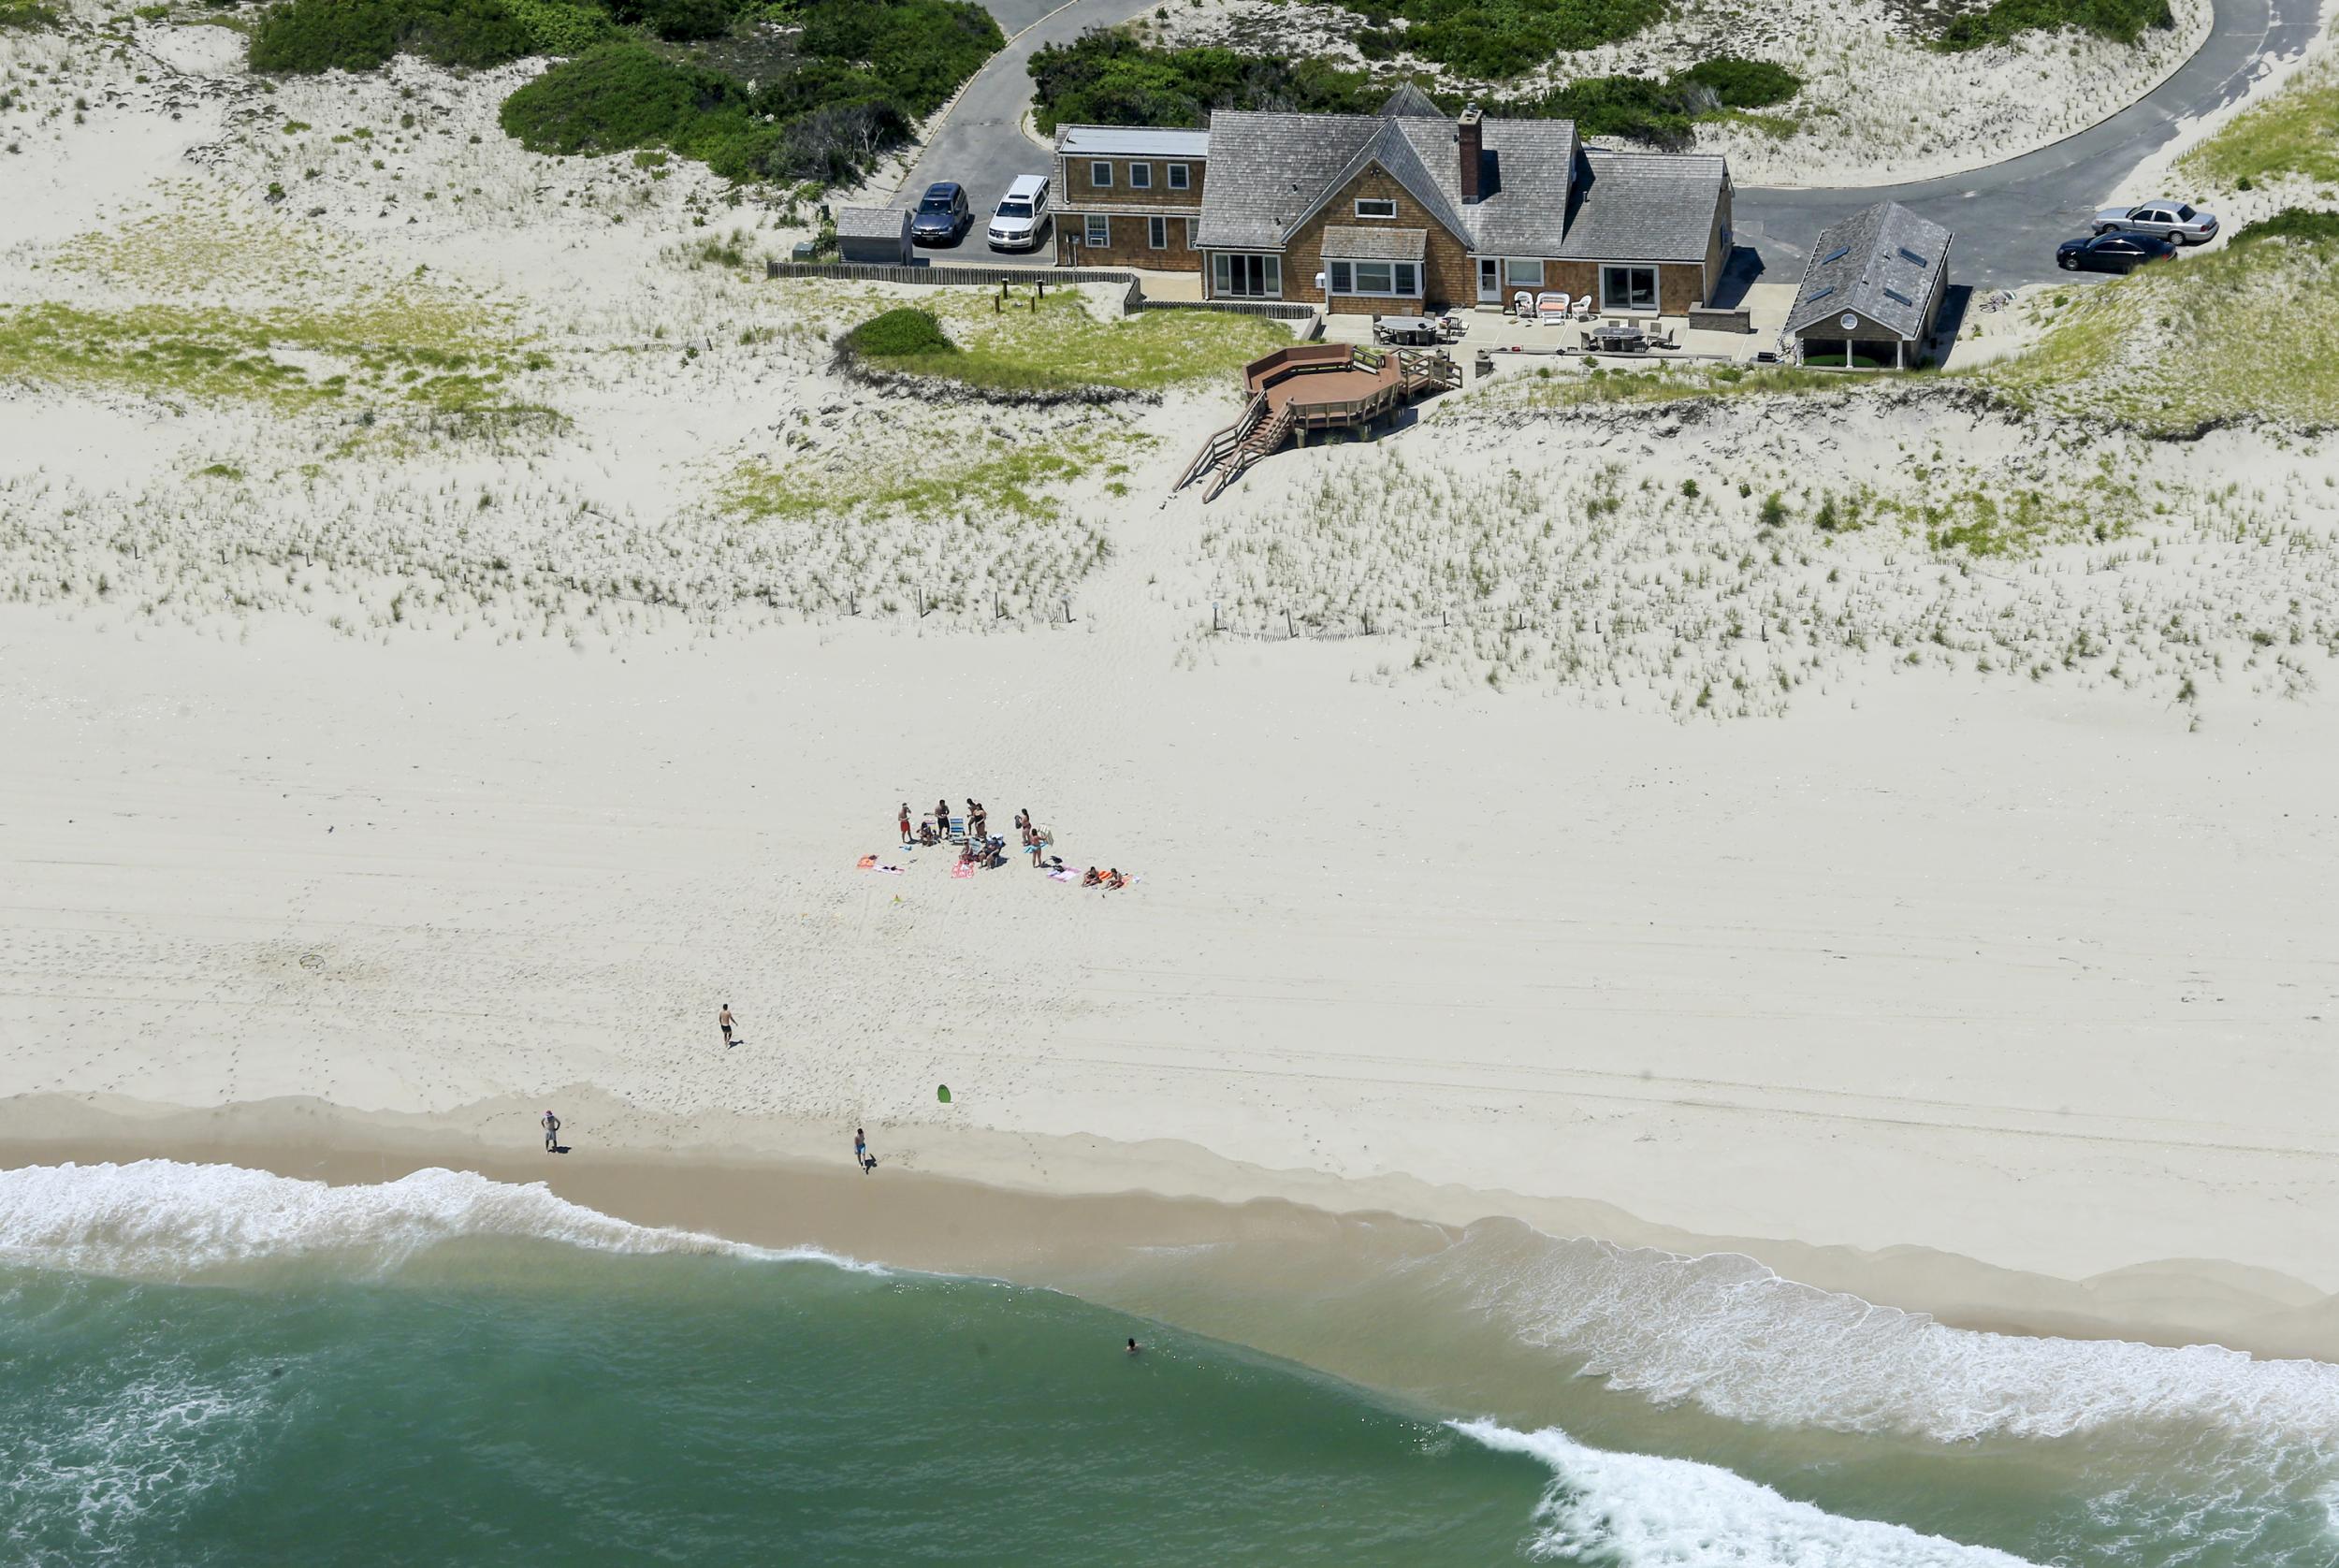 Christie was pictured enjoying a beach his government had closed